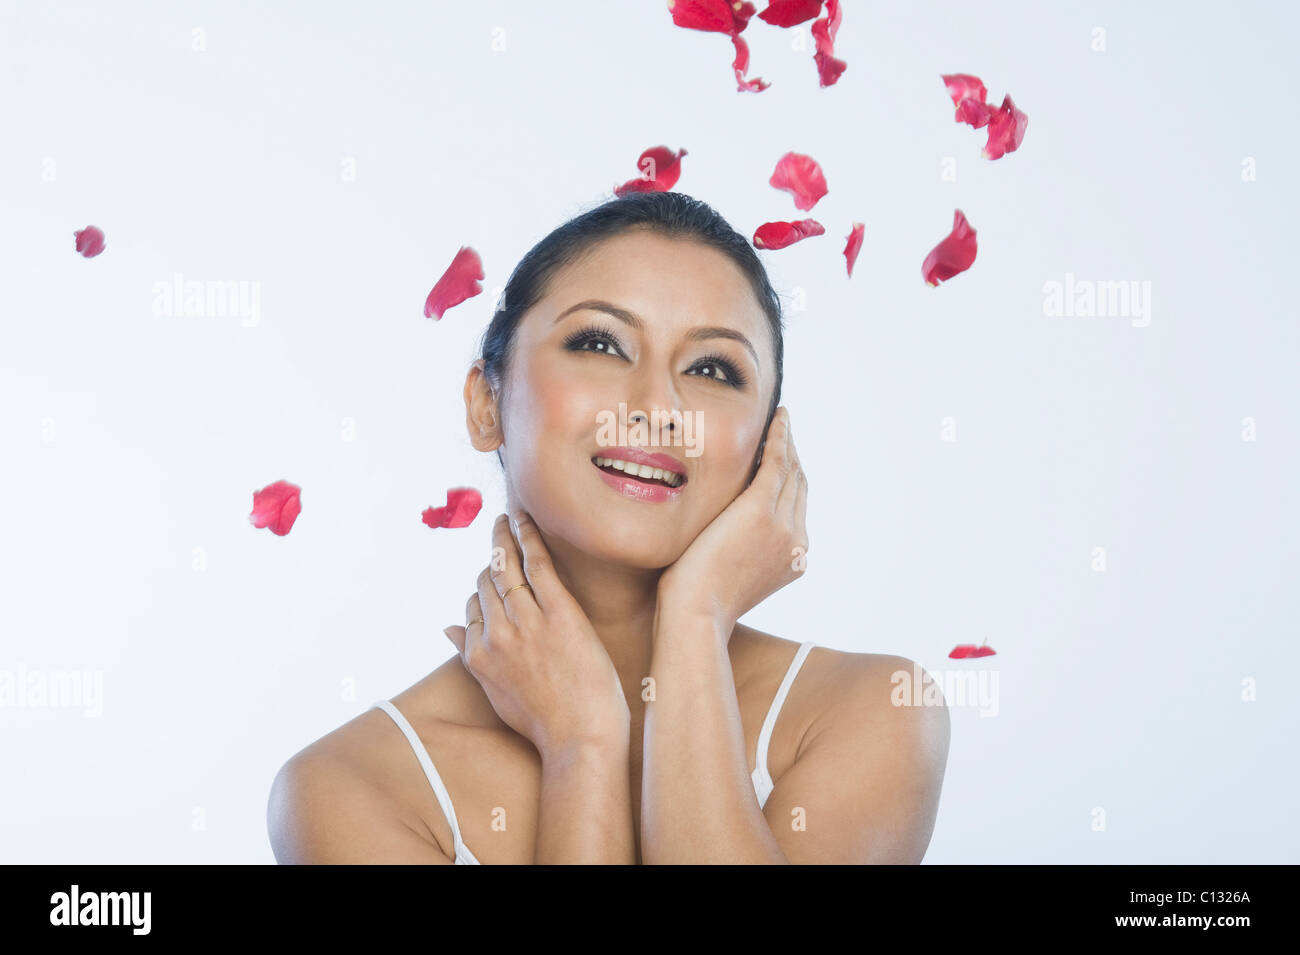 Rose petals falling on a woman Stock Photo